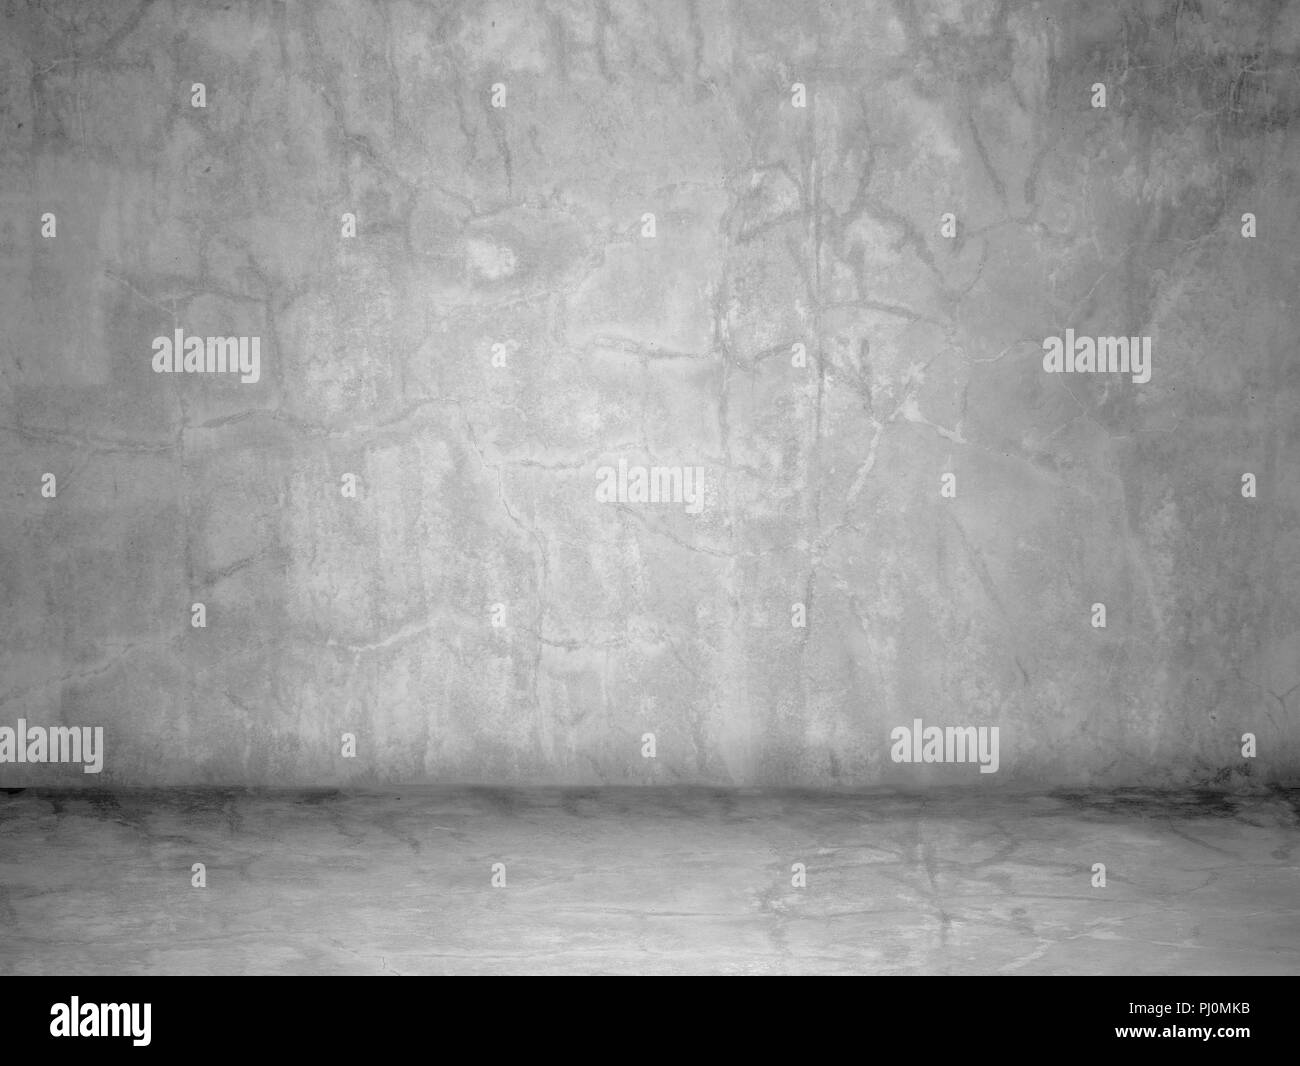 Dark Room Concrete Wall Background Interior Concrete Texture Wall And Floor Stock Photo Alamy